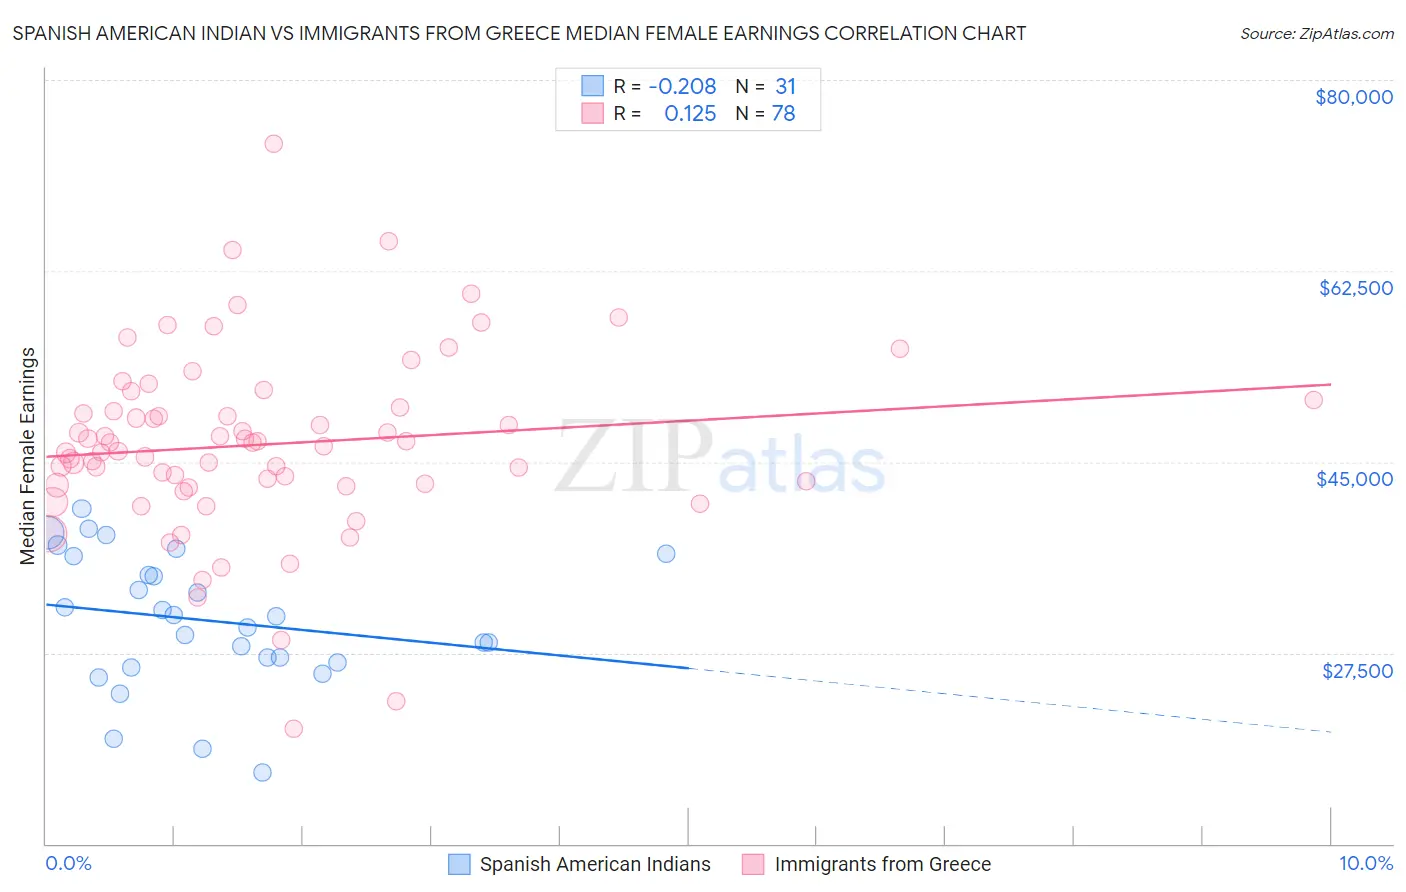 Spanish American Indian vs Immigrants from Greece Median Female Earnings